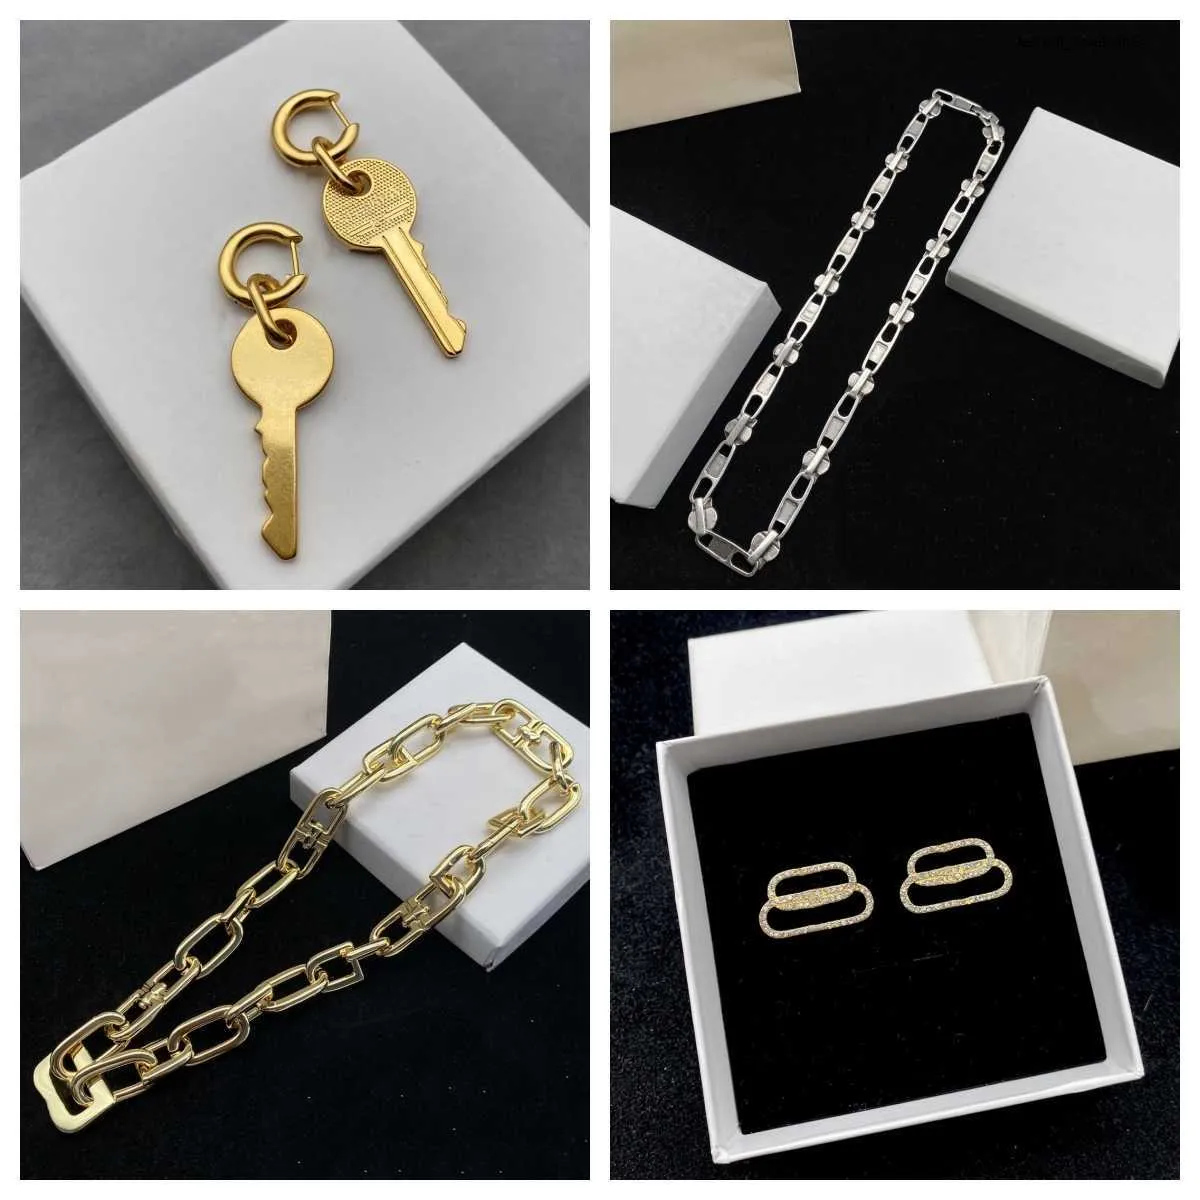 New Fashion Top Classic Designer Necklaces Bracelet Earrings Classic B Letter Short Necklace For Woman Gothic Jewelry Hip Hop Party Girls Sexy Clavicle Jewelry